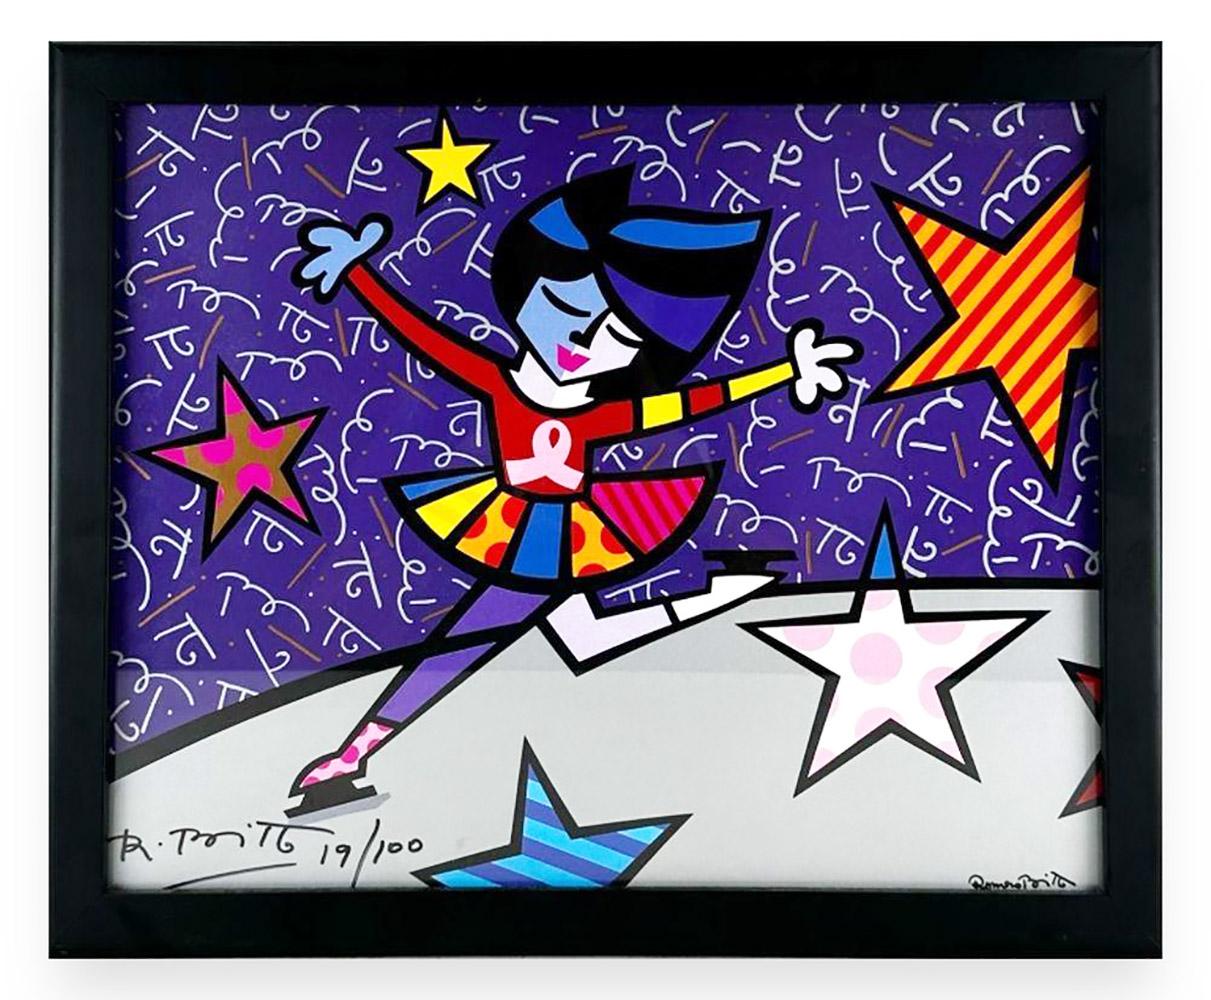 Romero Britto 
"Golden Moment Ice Skater". 
Screenprint on paper
Signed lower left R. Britto & numbered 19/100. 
Approx: 16" x 19" in.
Condition: In excellent condition

Romero Britto Brazilian Artist: Britto's work captures the attention of both